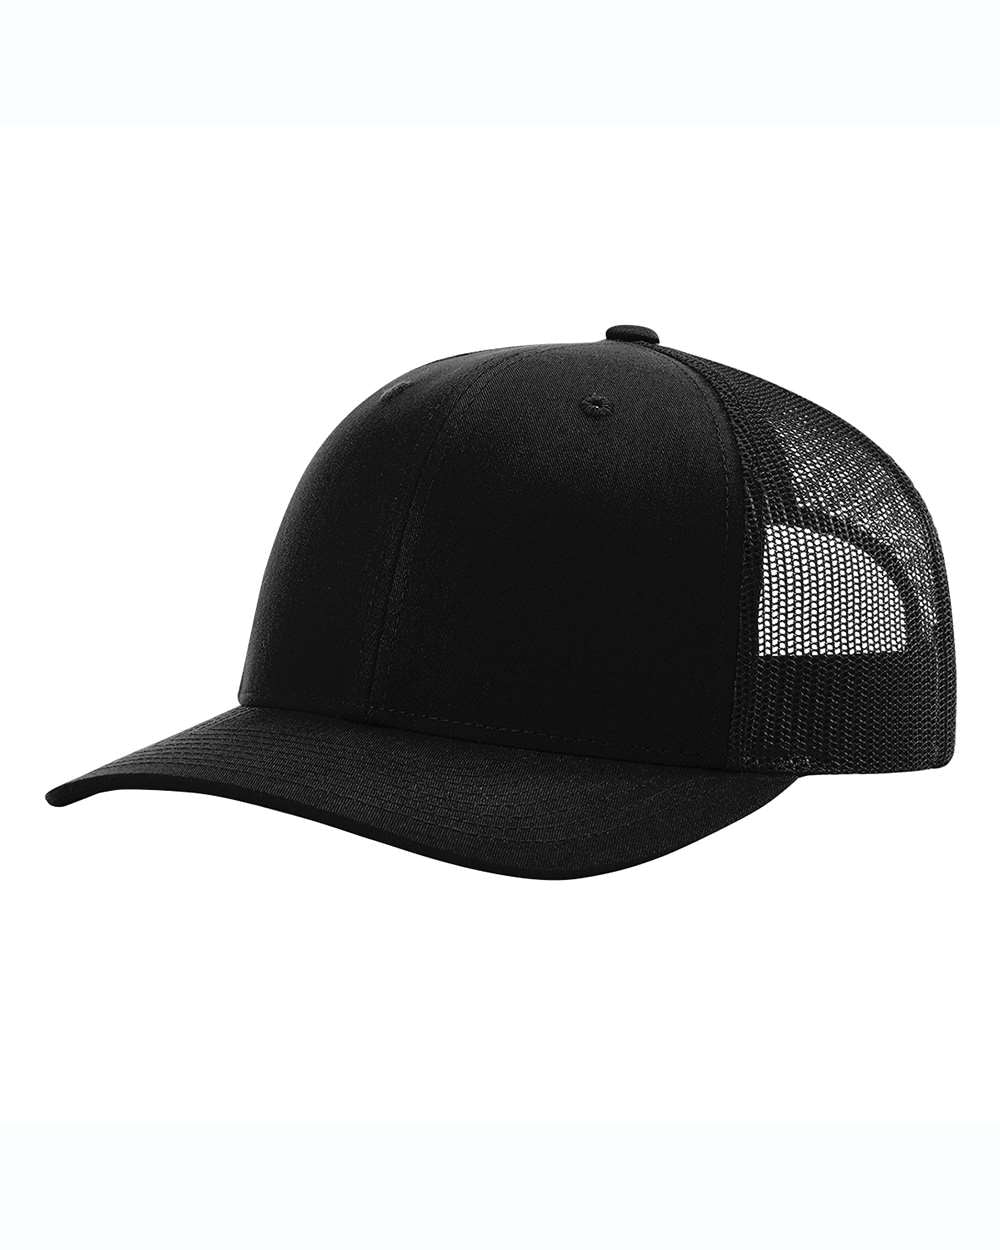 Richardson 112Y Youth Trucker Snapback Cap With Custom Patch